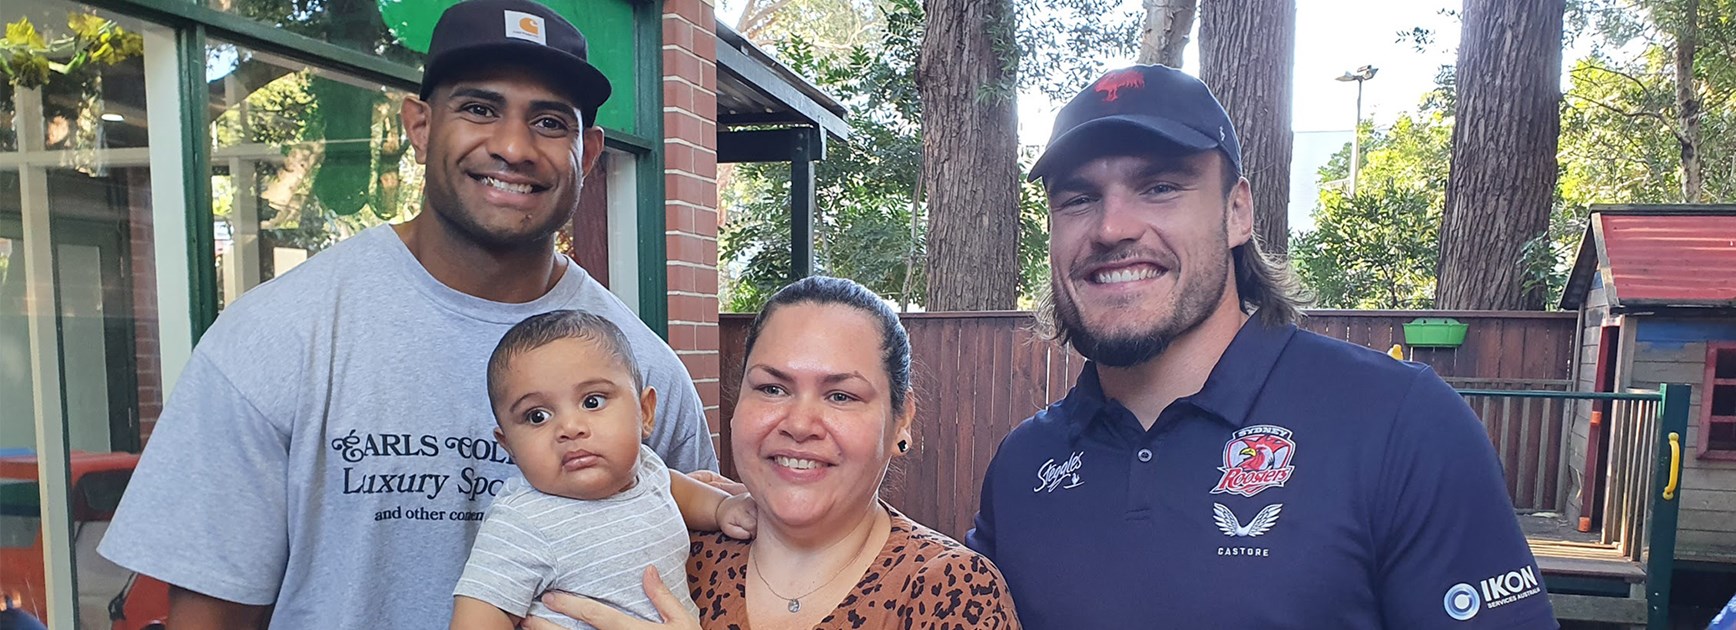 Sydney Roosters & Steggles Back Seriously Ill Children and Families at Ronald McDonald House Charities